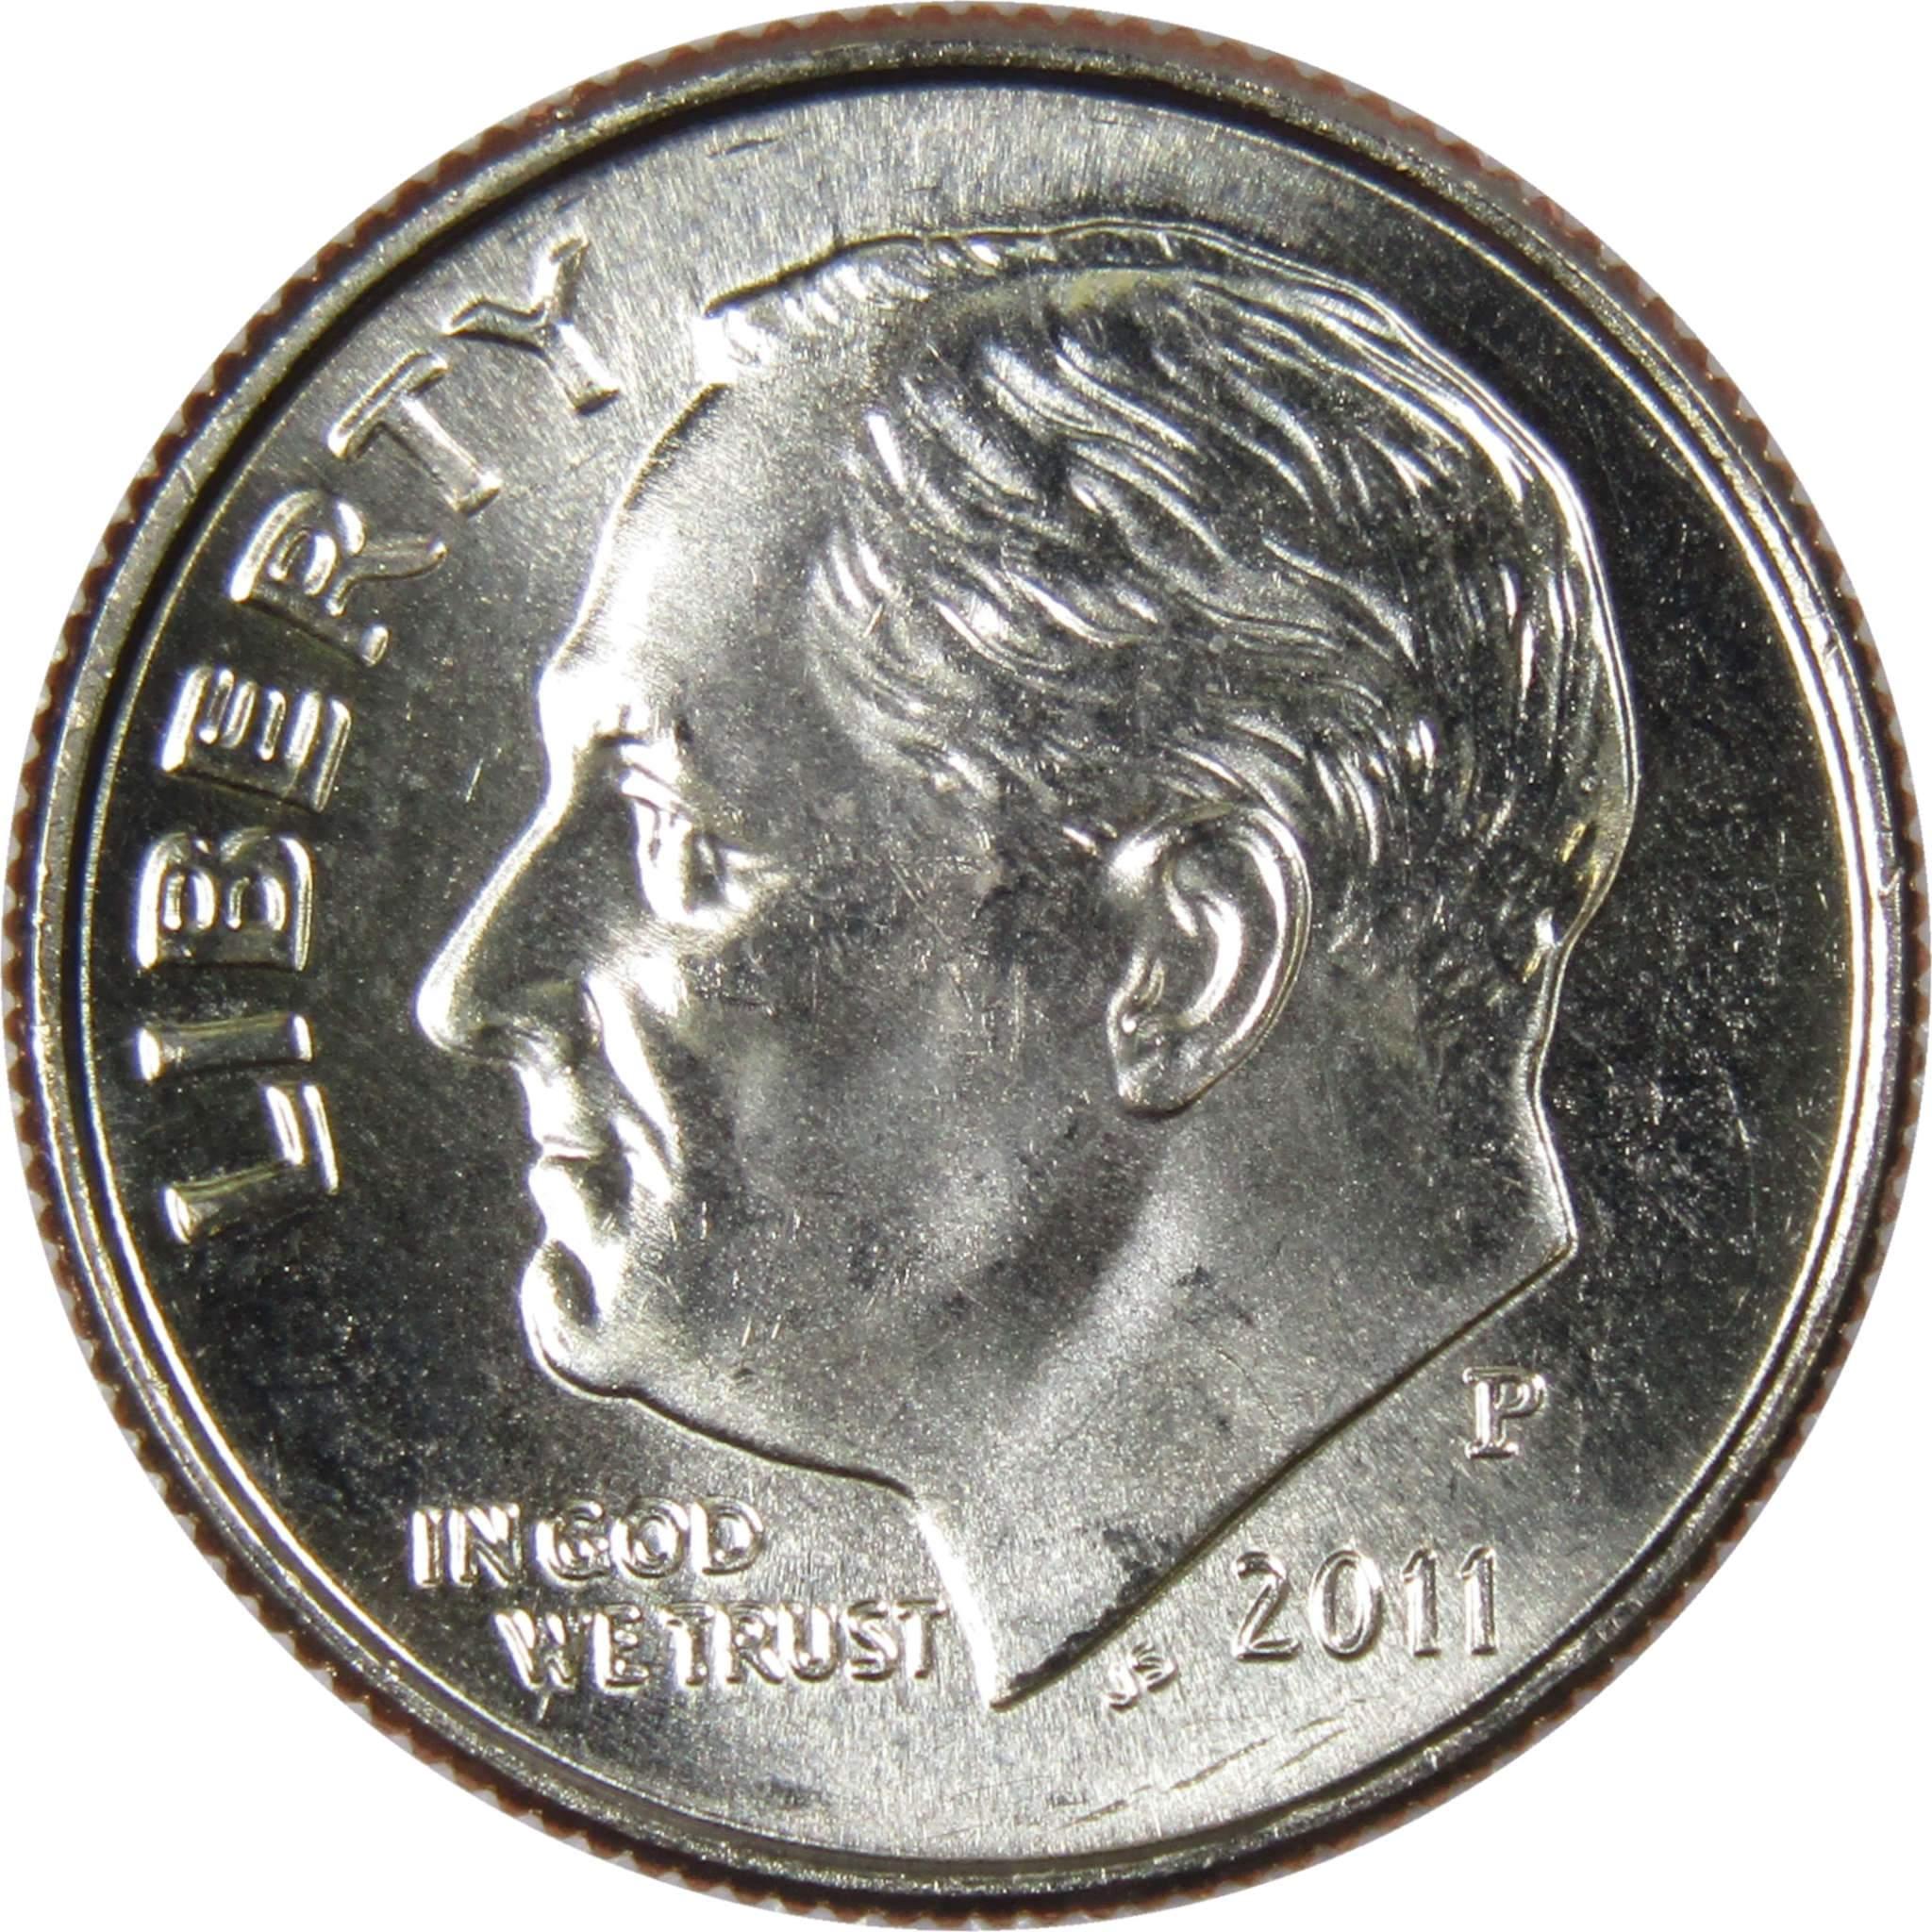 2011 P Roosevelt Dime BU Uncirculated Mint State 10c US Coin Collectible